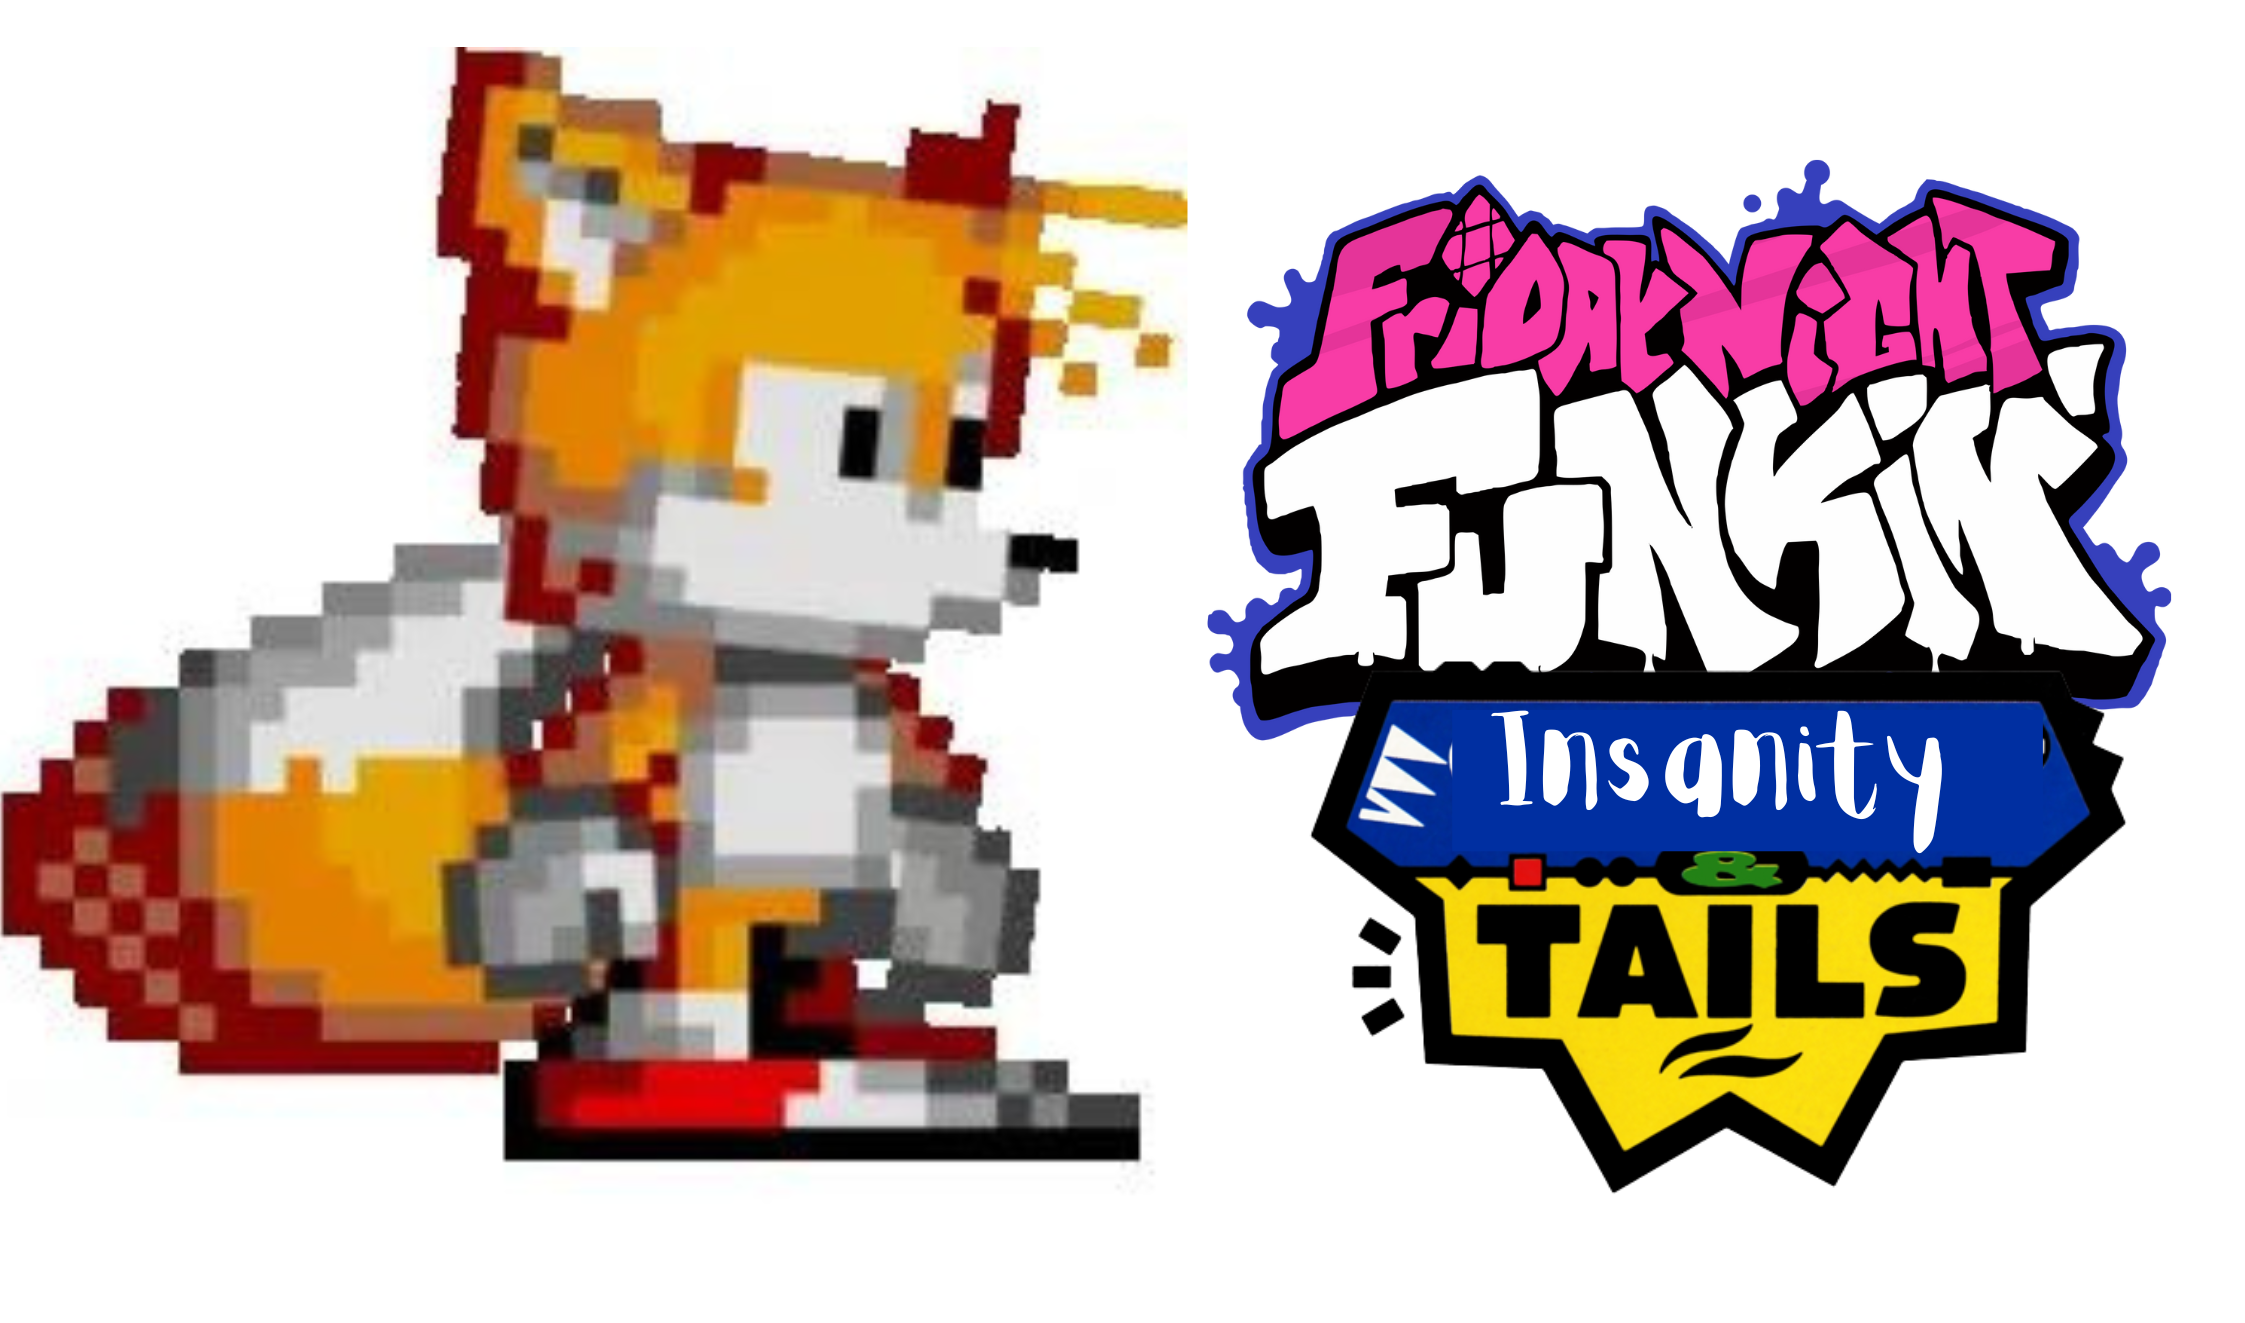 About: FNF Mod Tails Insanity Battle (Google Play version)